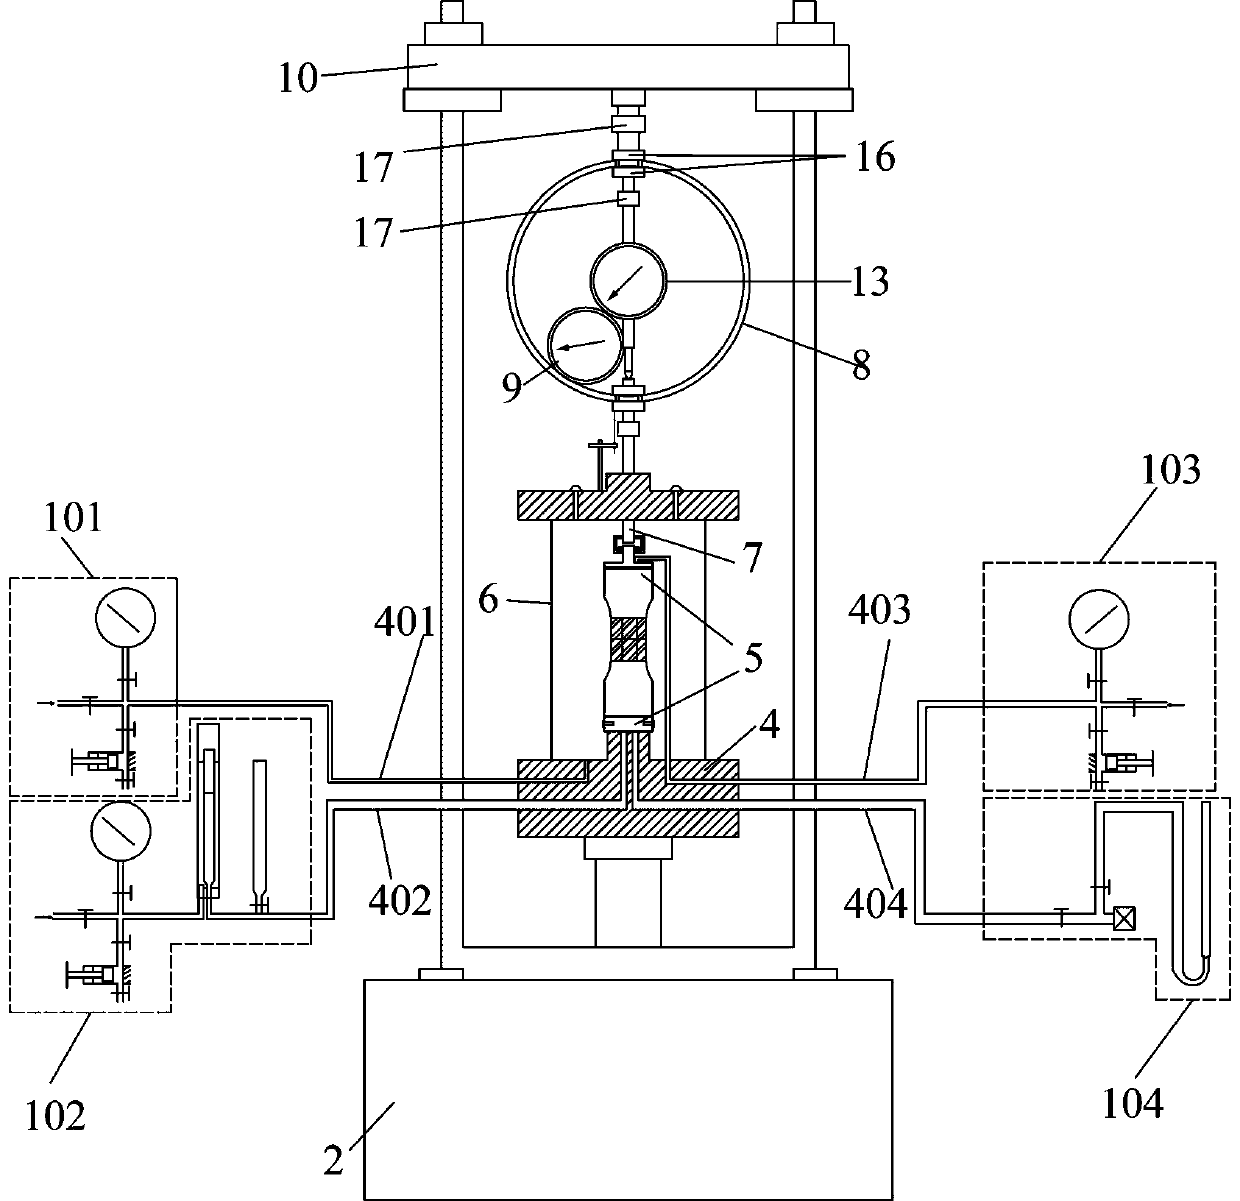 Strain-controlled-type unsaturated soil triaxial tensile instrument